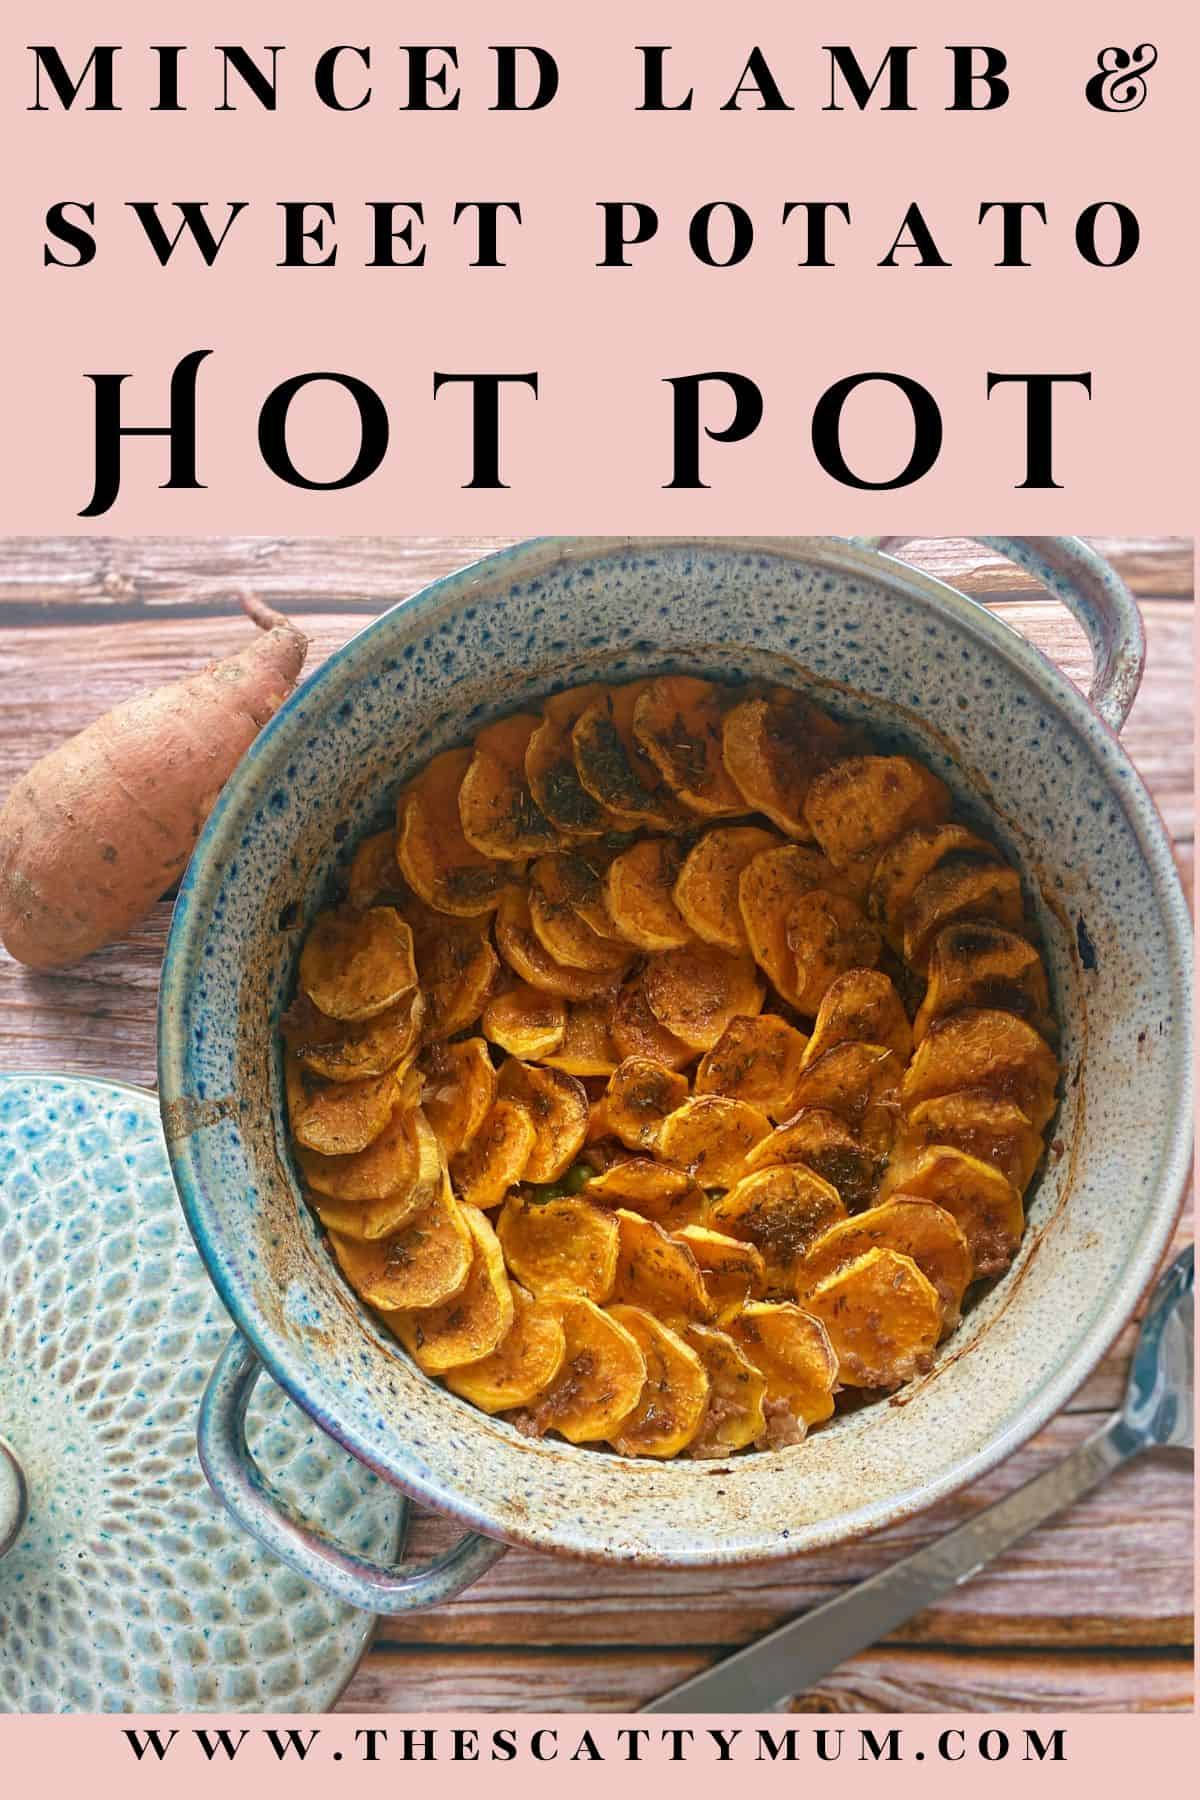 pinterest image for minced lamb and sweet potato hotpot